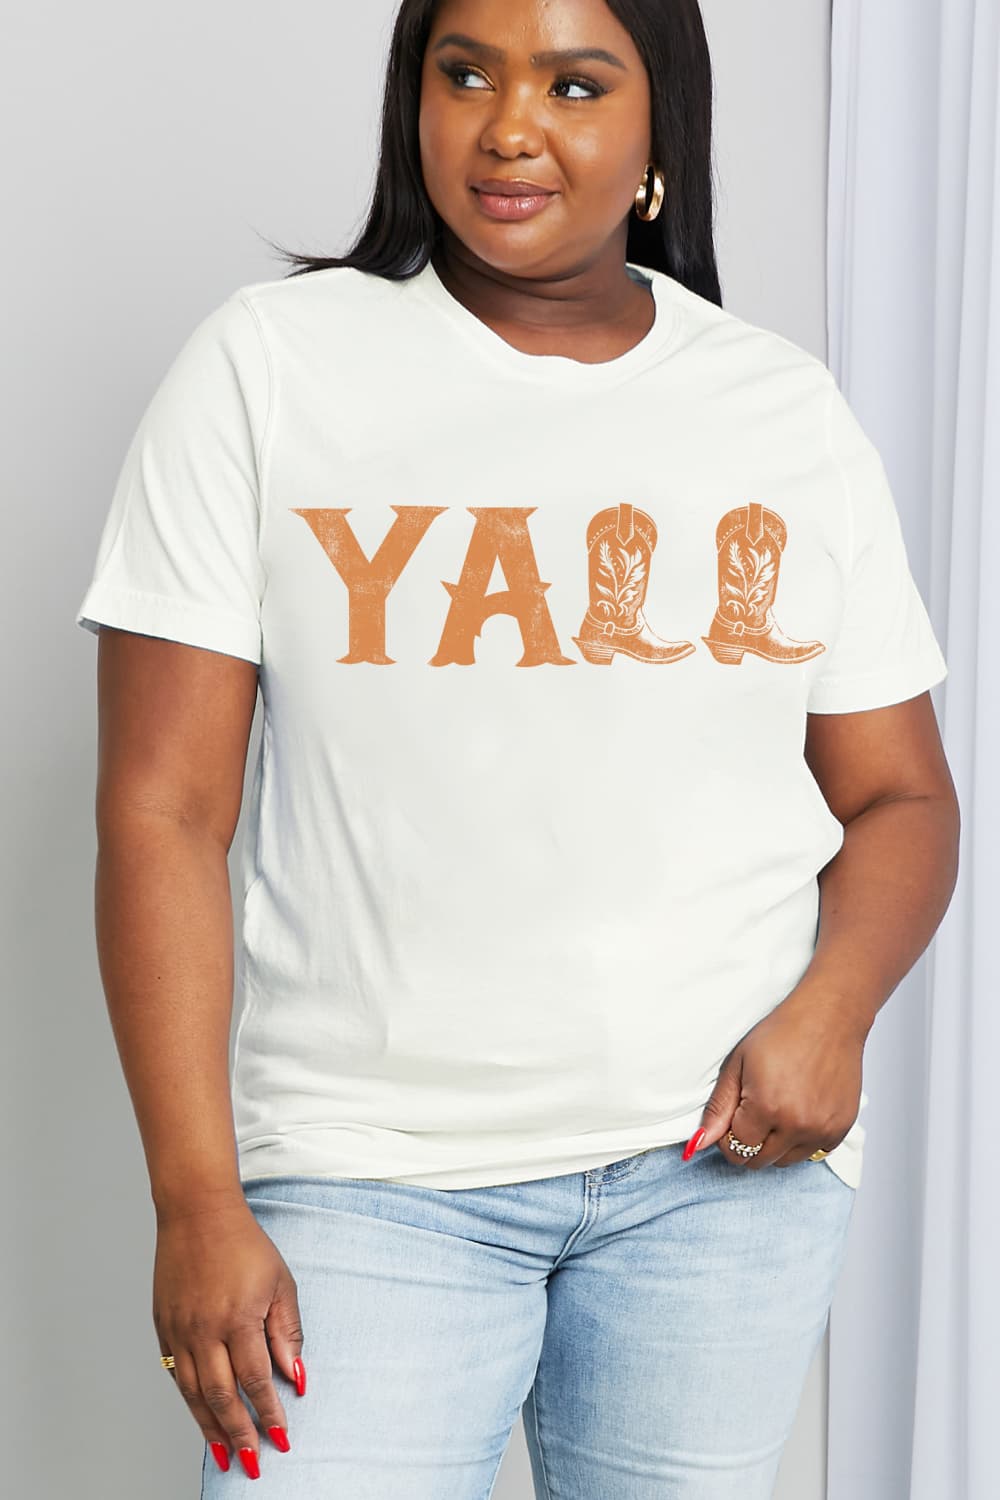 Women's Full Size YALL Graphic Cotton Tee